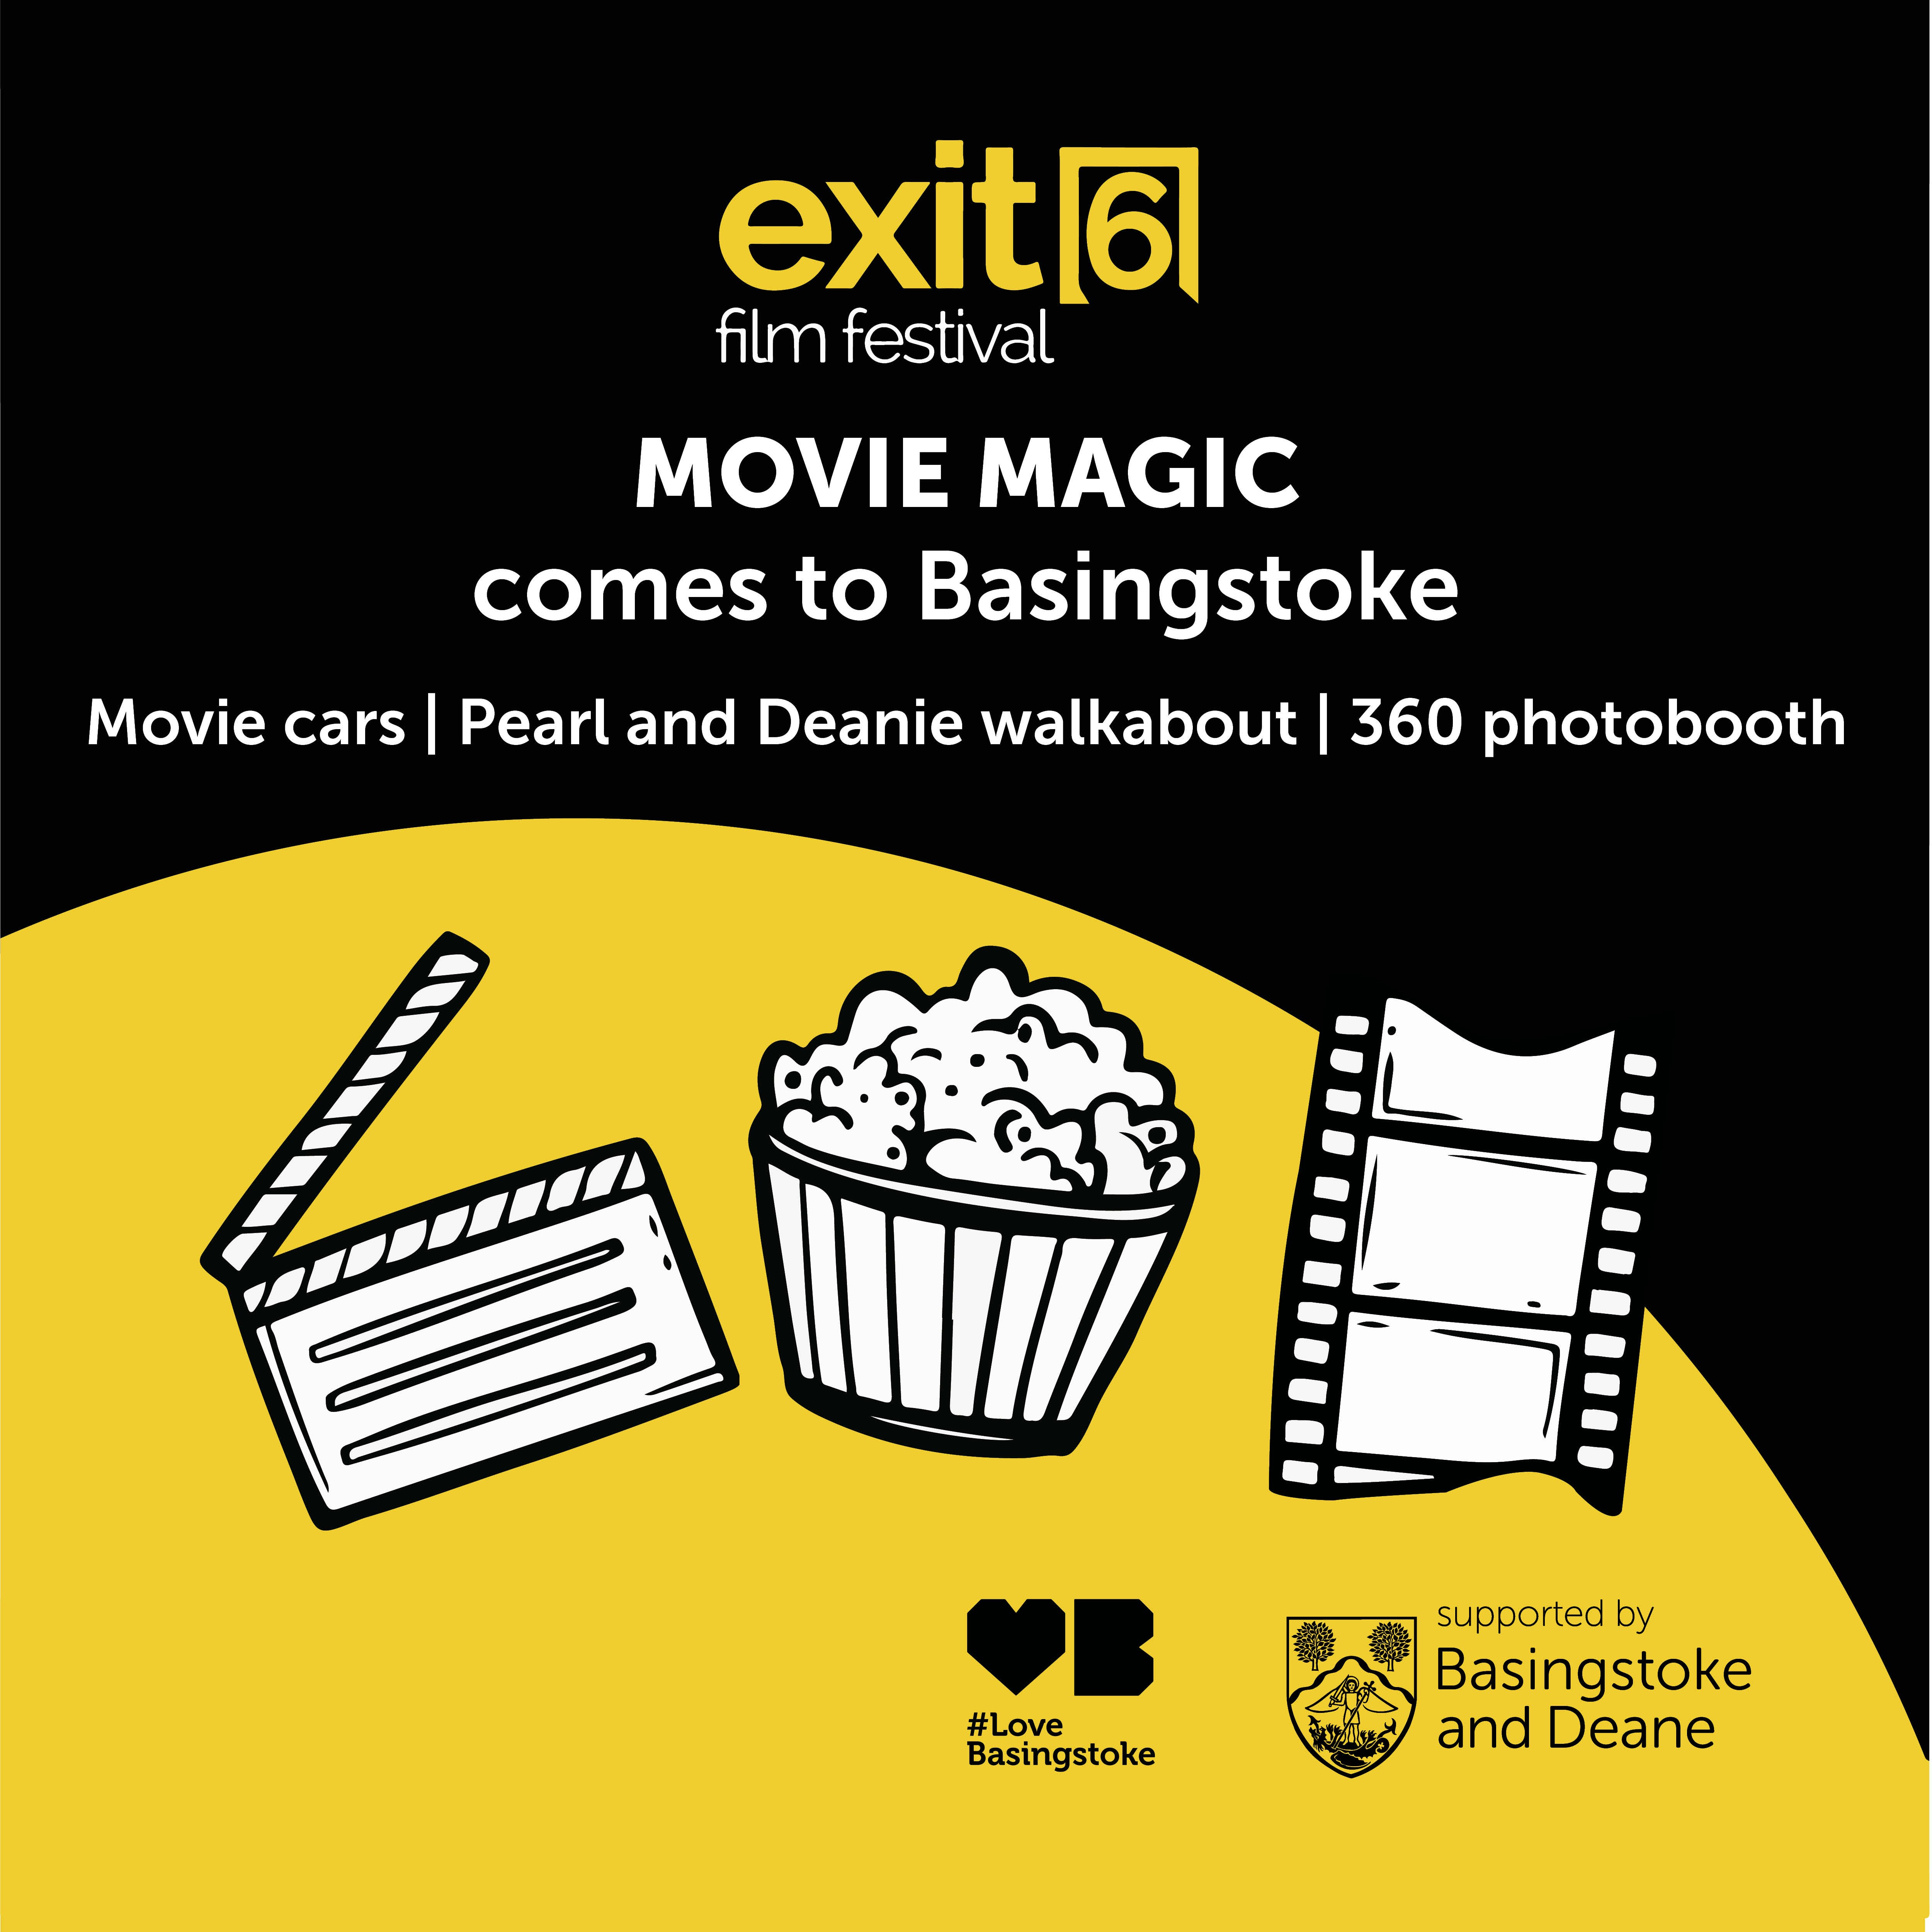 A black and gold social card with black and white clip art images of a film clipboard, tub of popcorn and a photograph negative strip. White text states movie magic comes to Basingstoke.